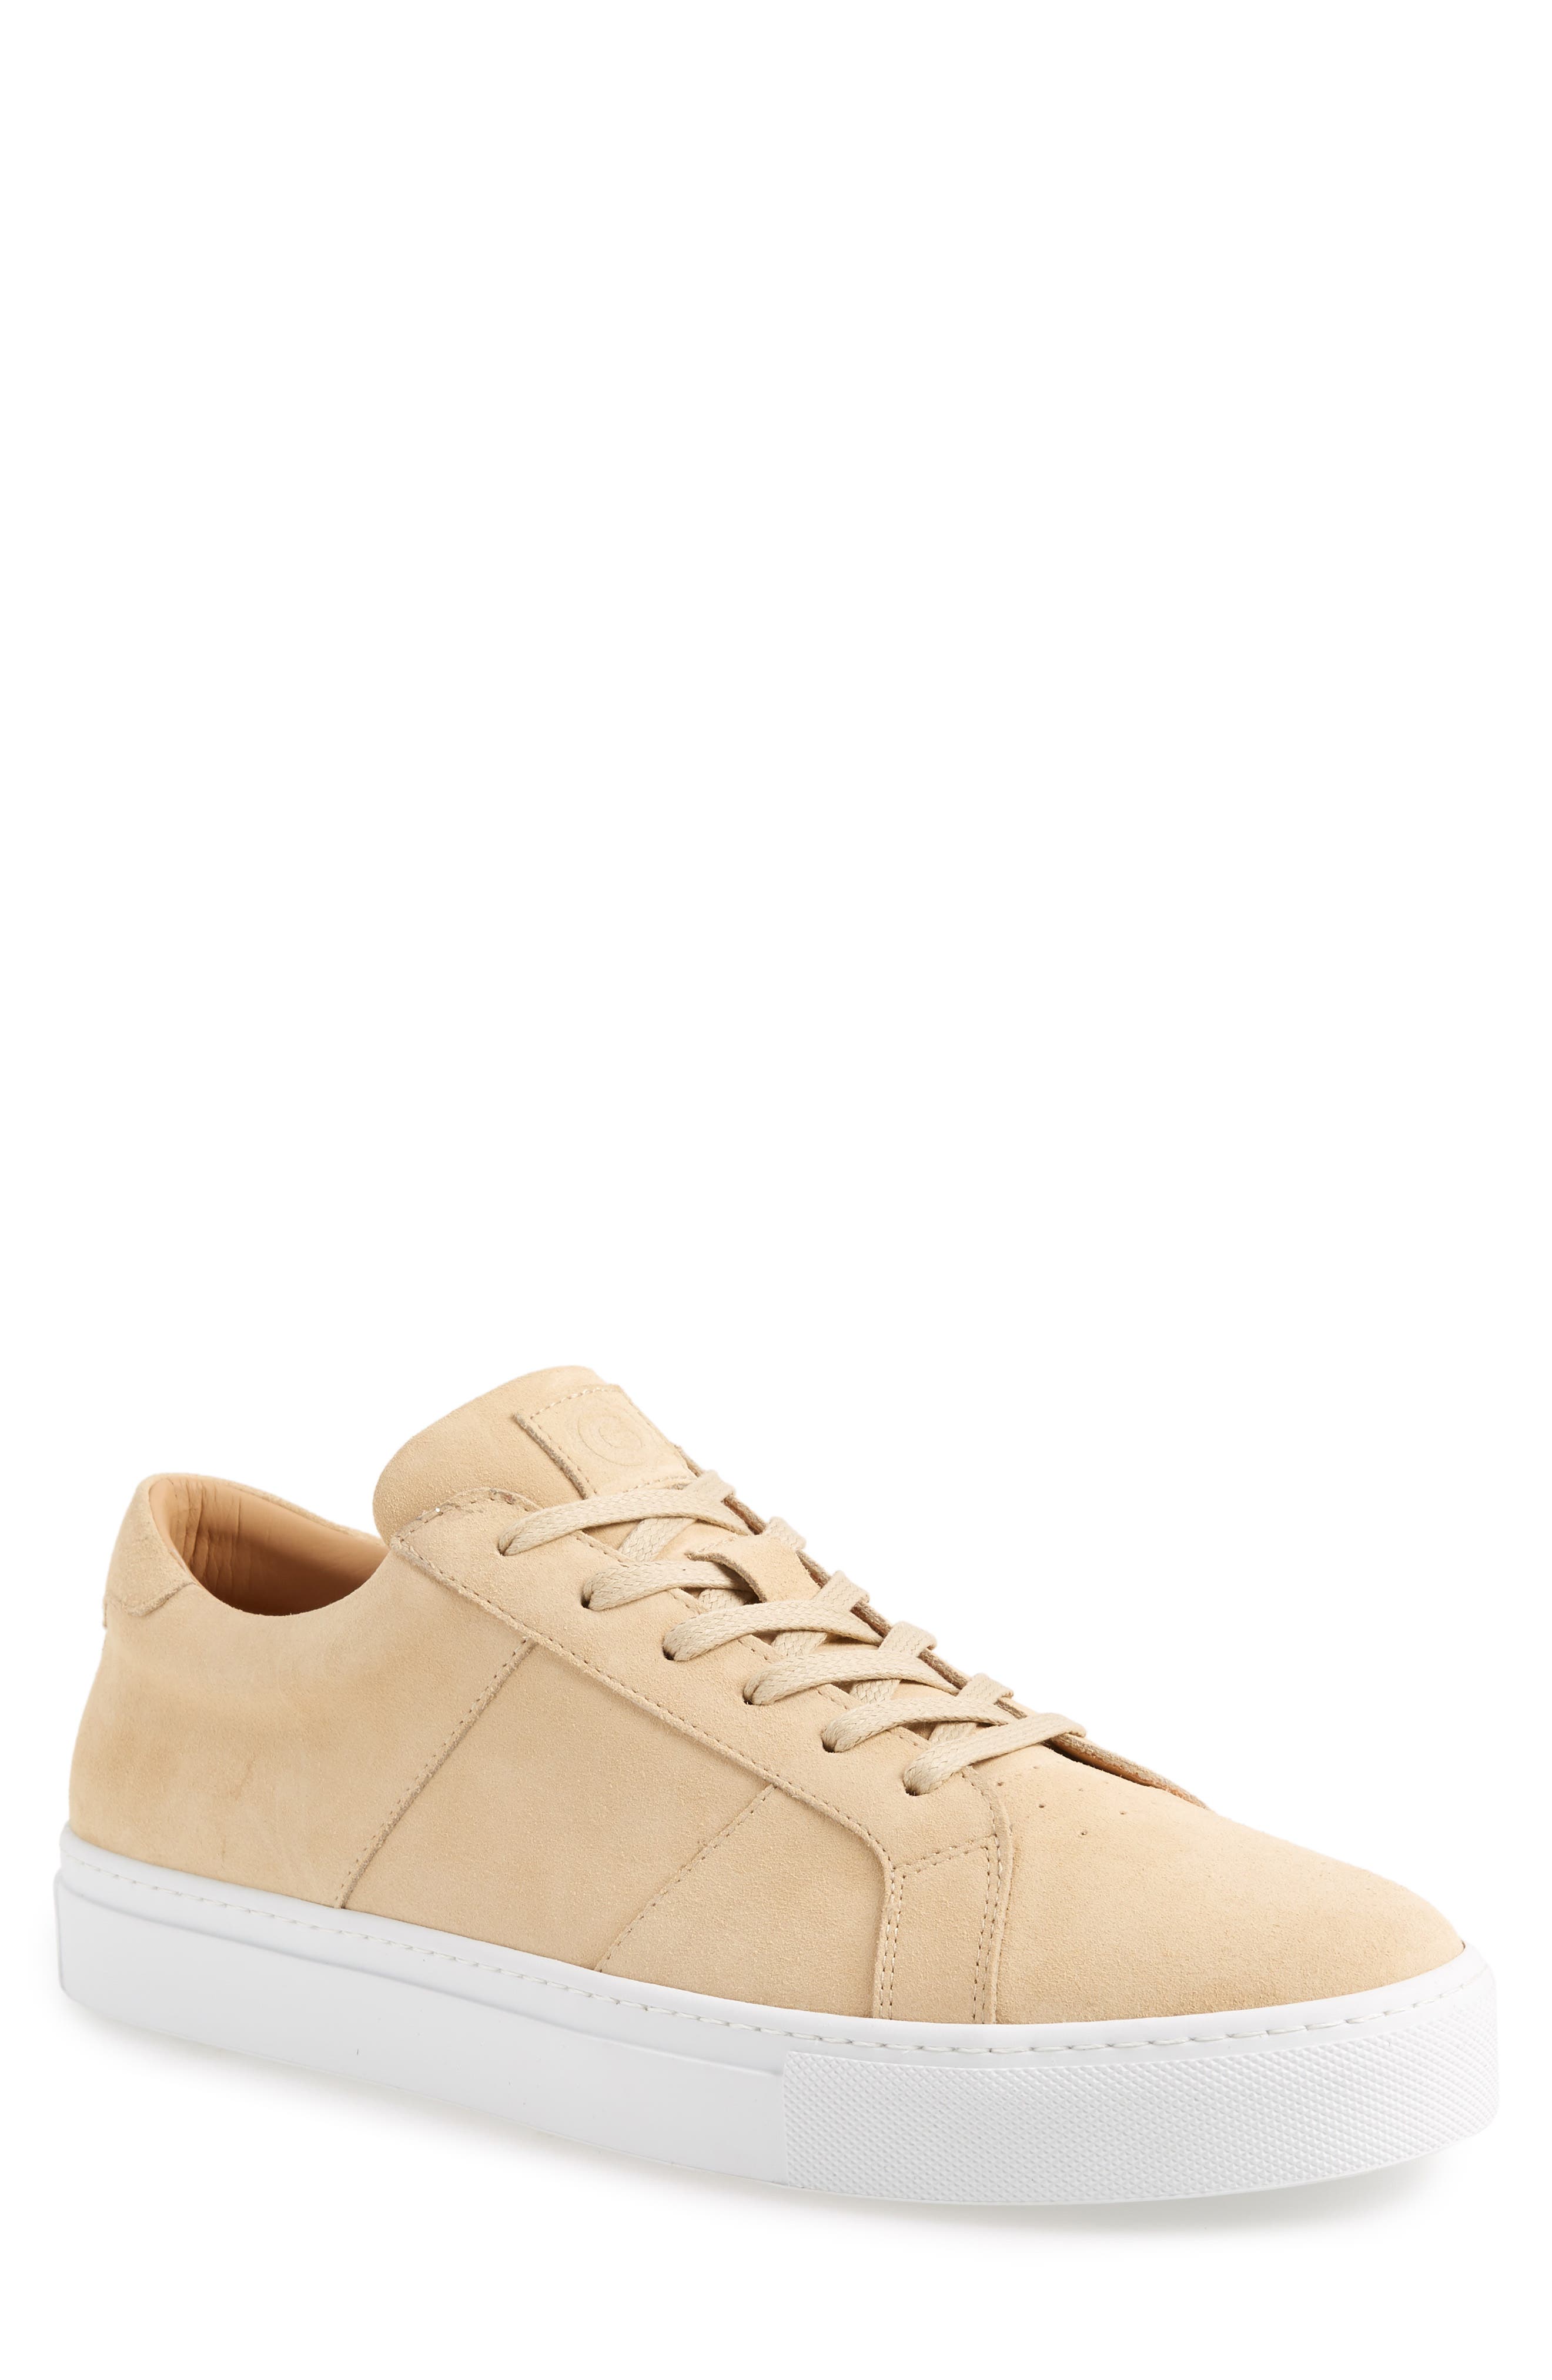 nordstrom greats royale